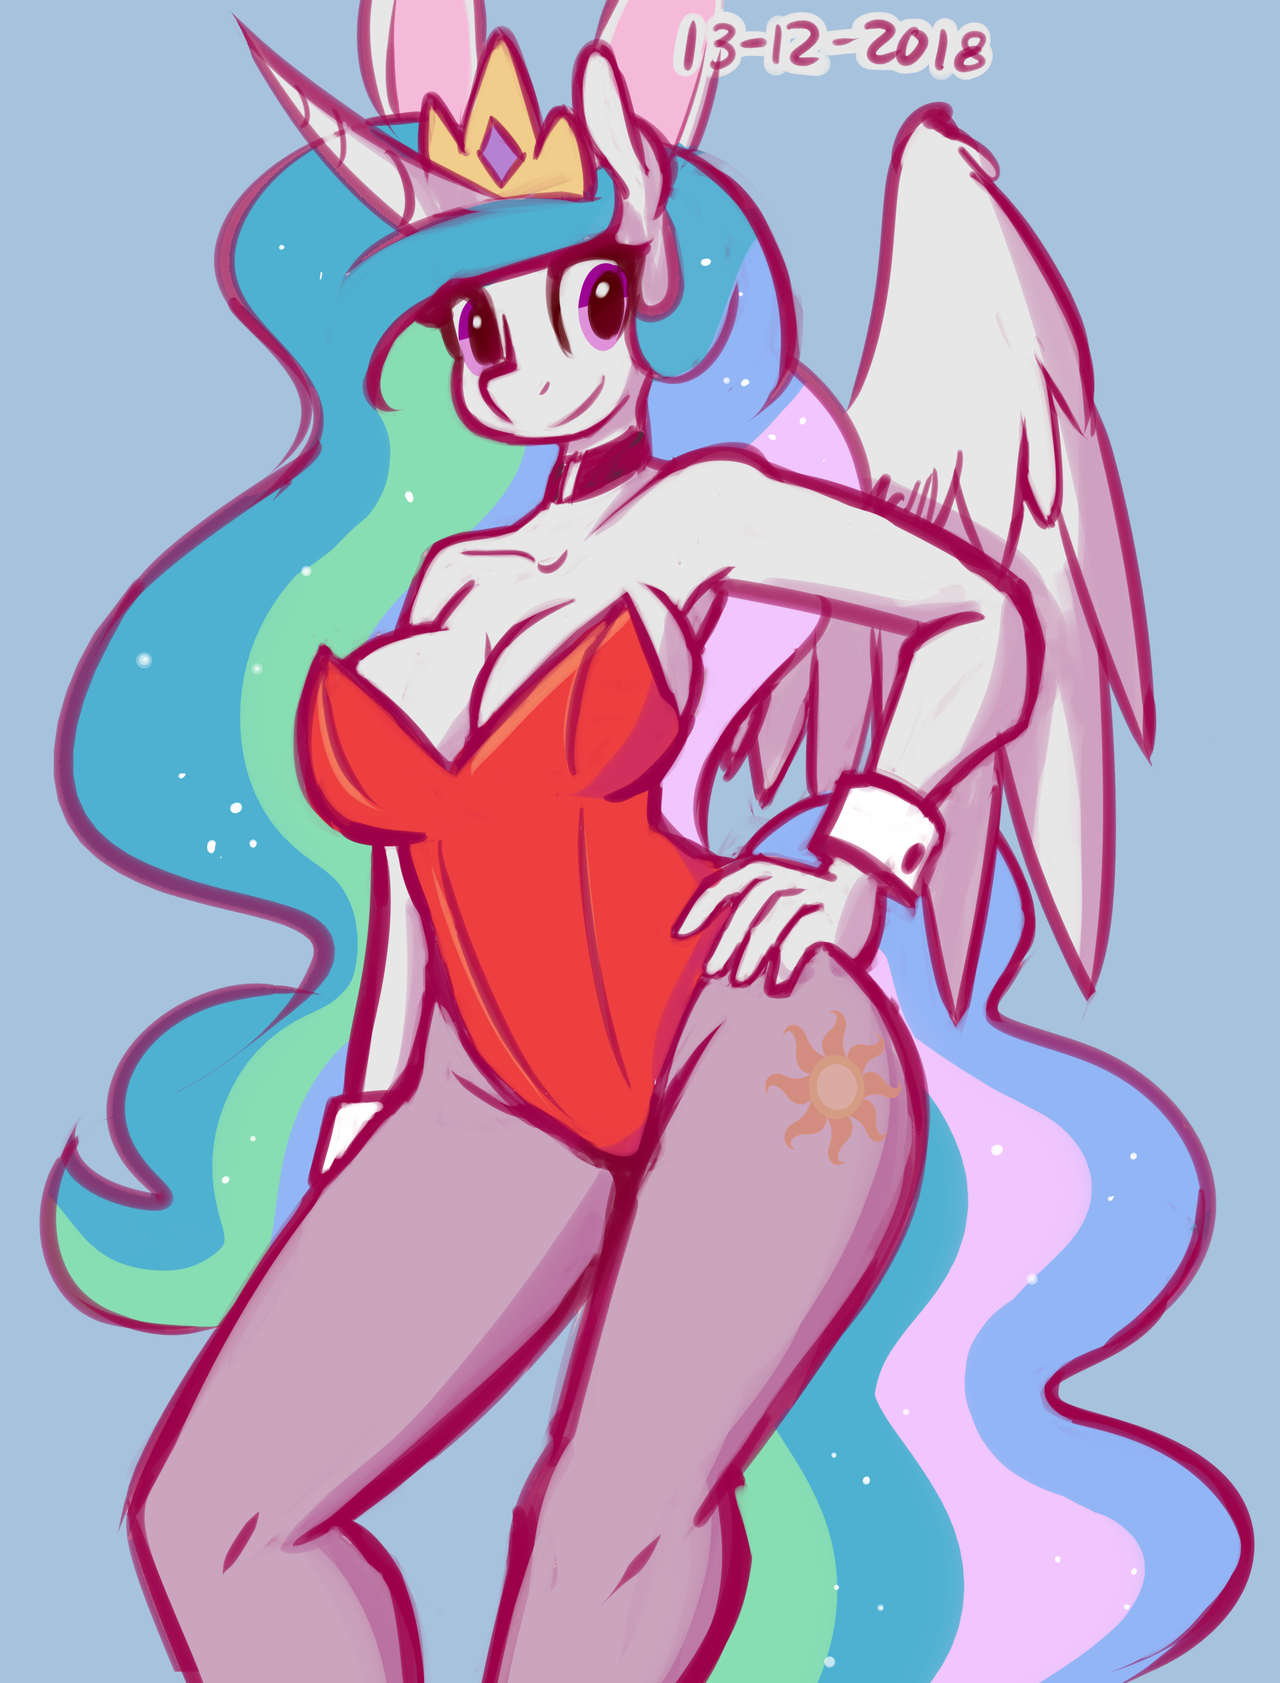 Drawin’ it again but better~Pink mane Celestia is underrated